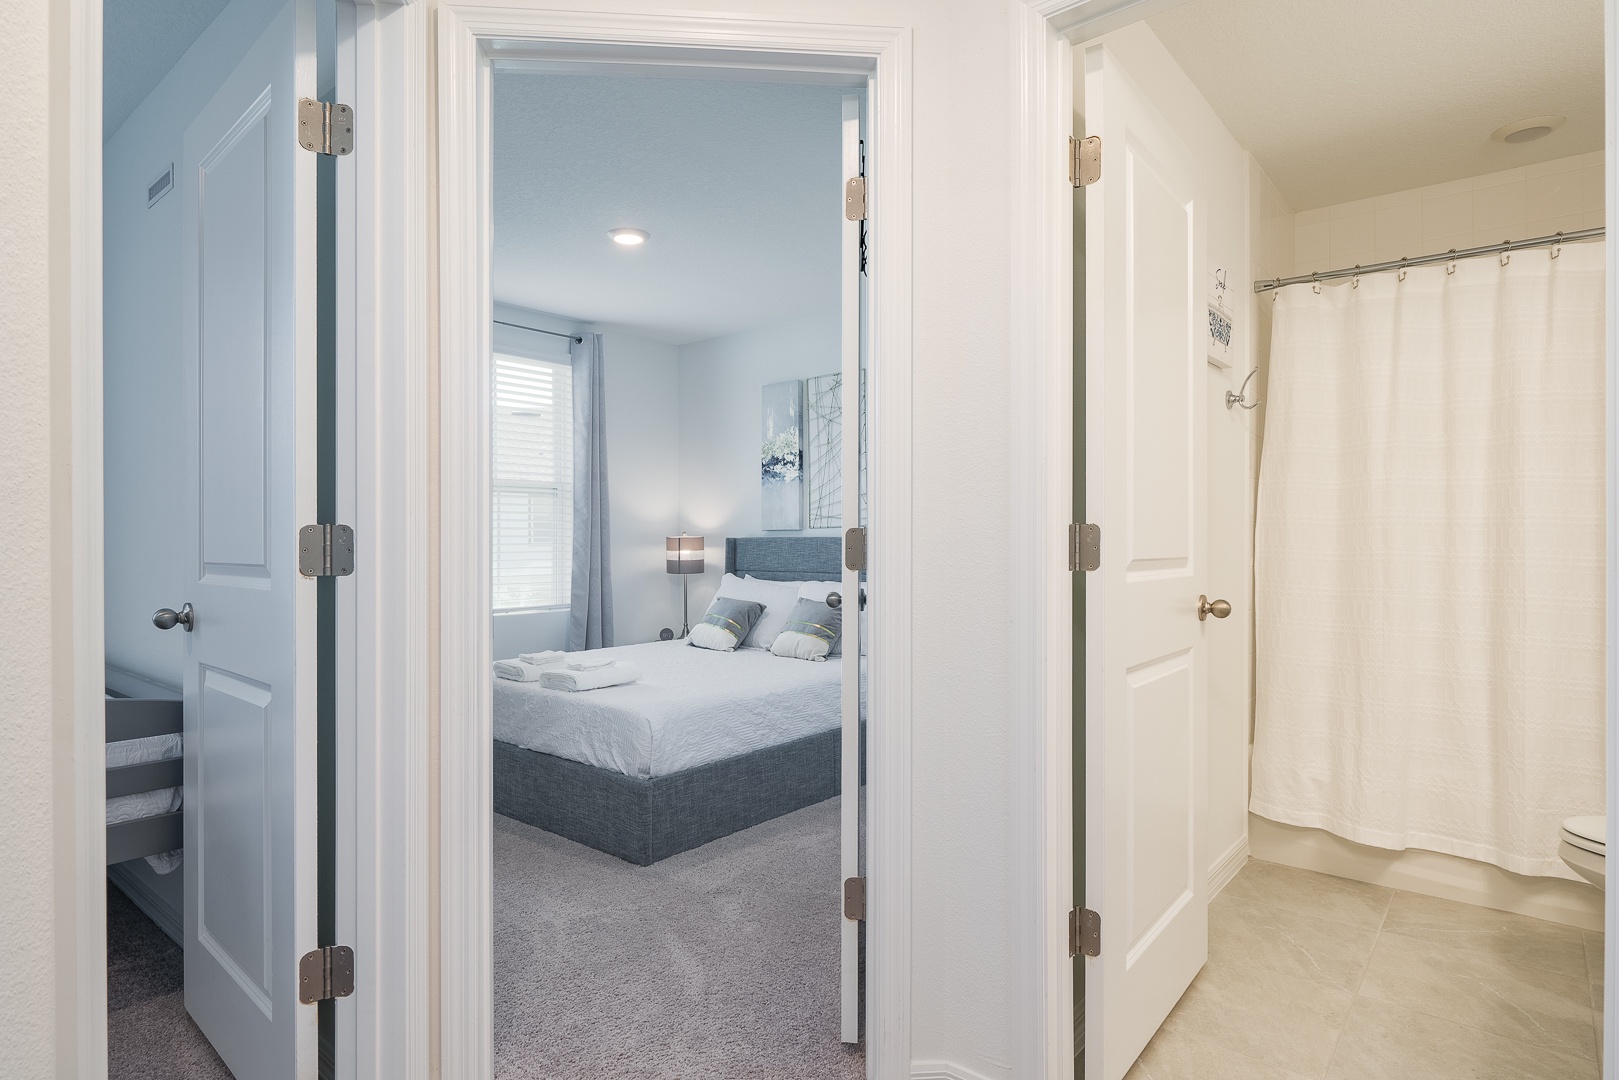 Two additional bedrooms & a full bath are available on the second floor